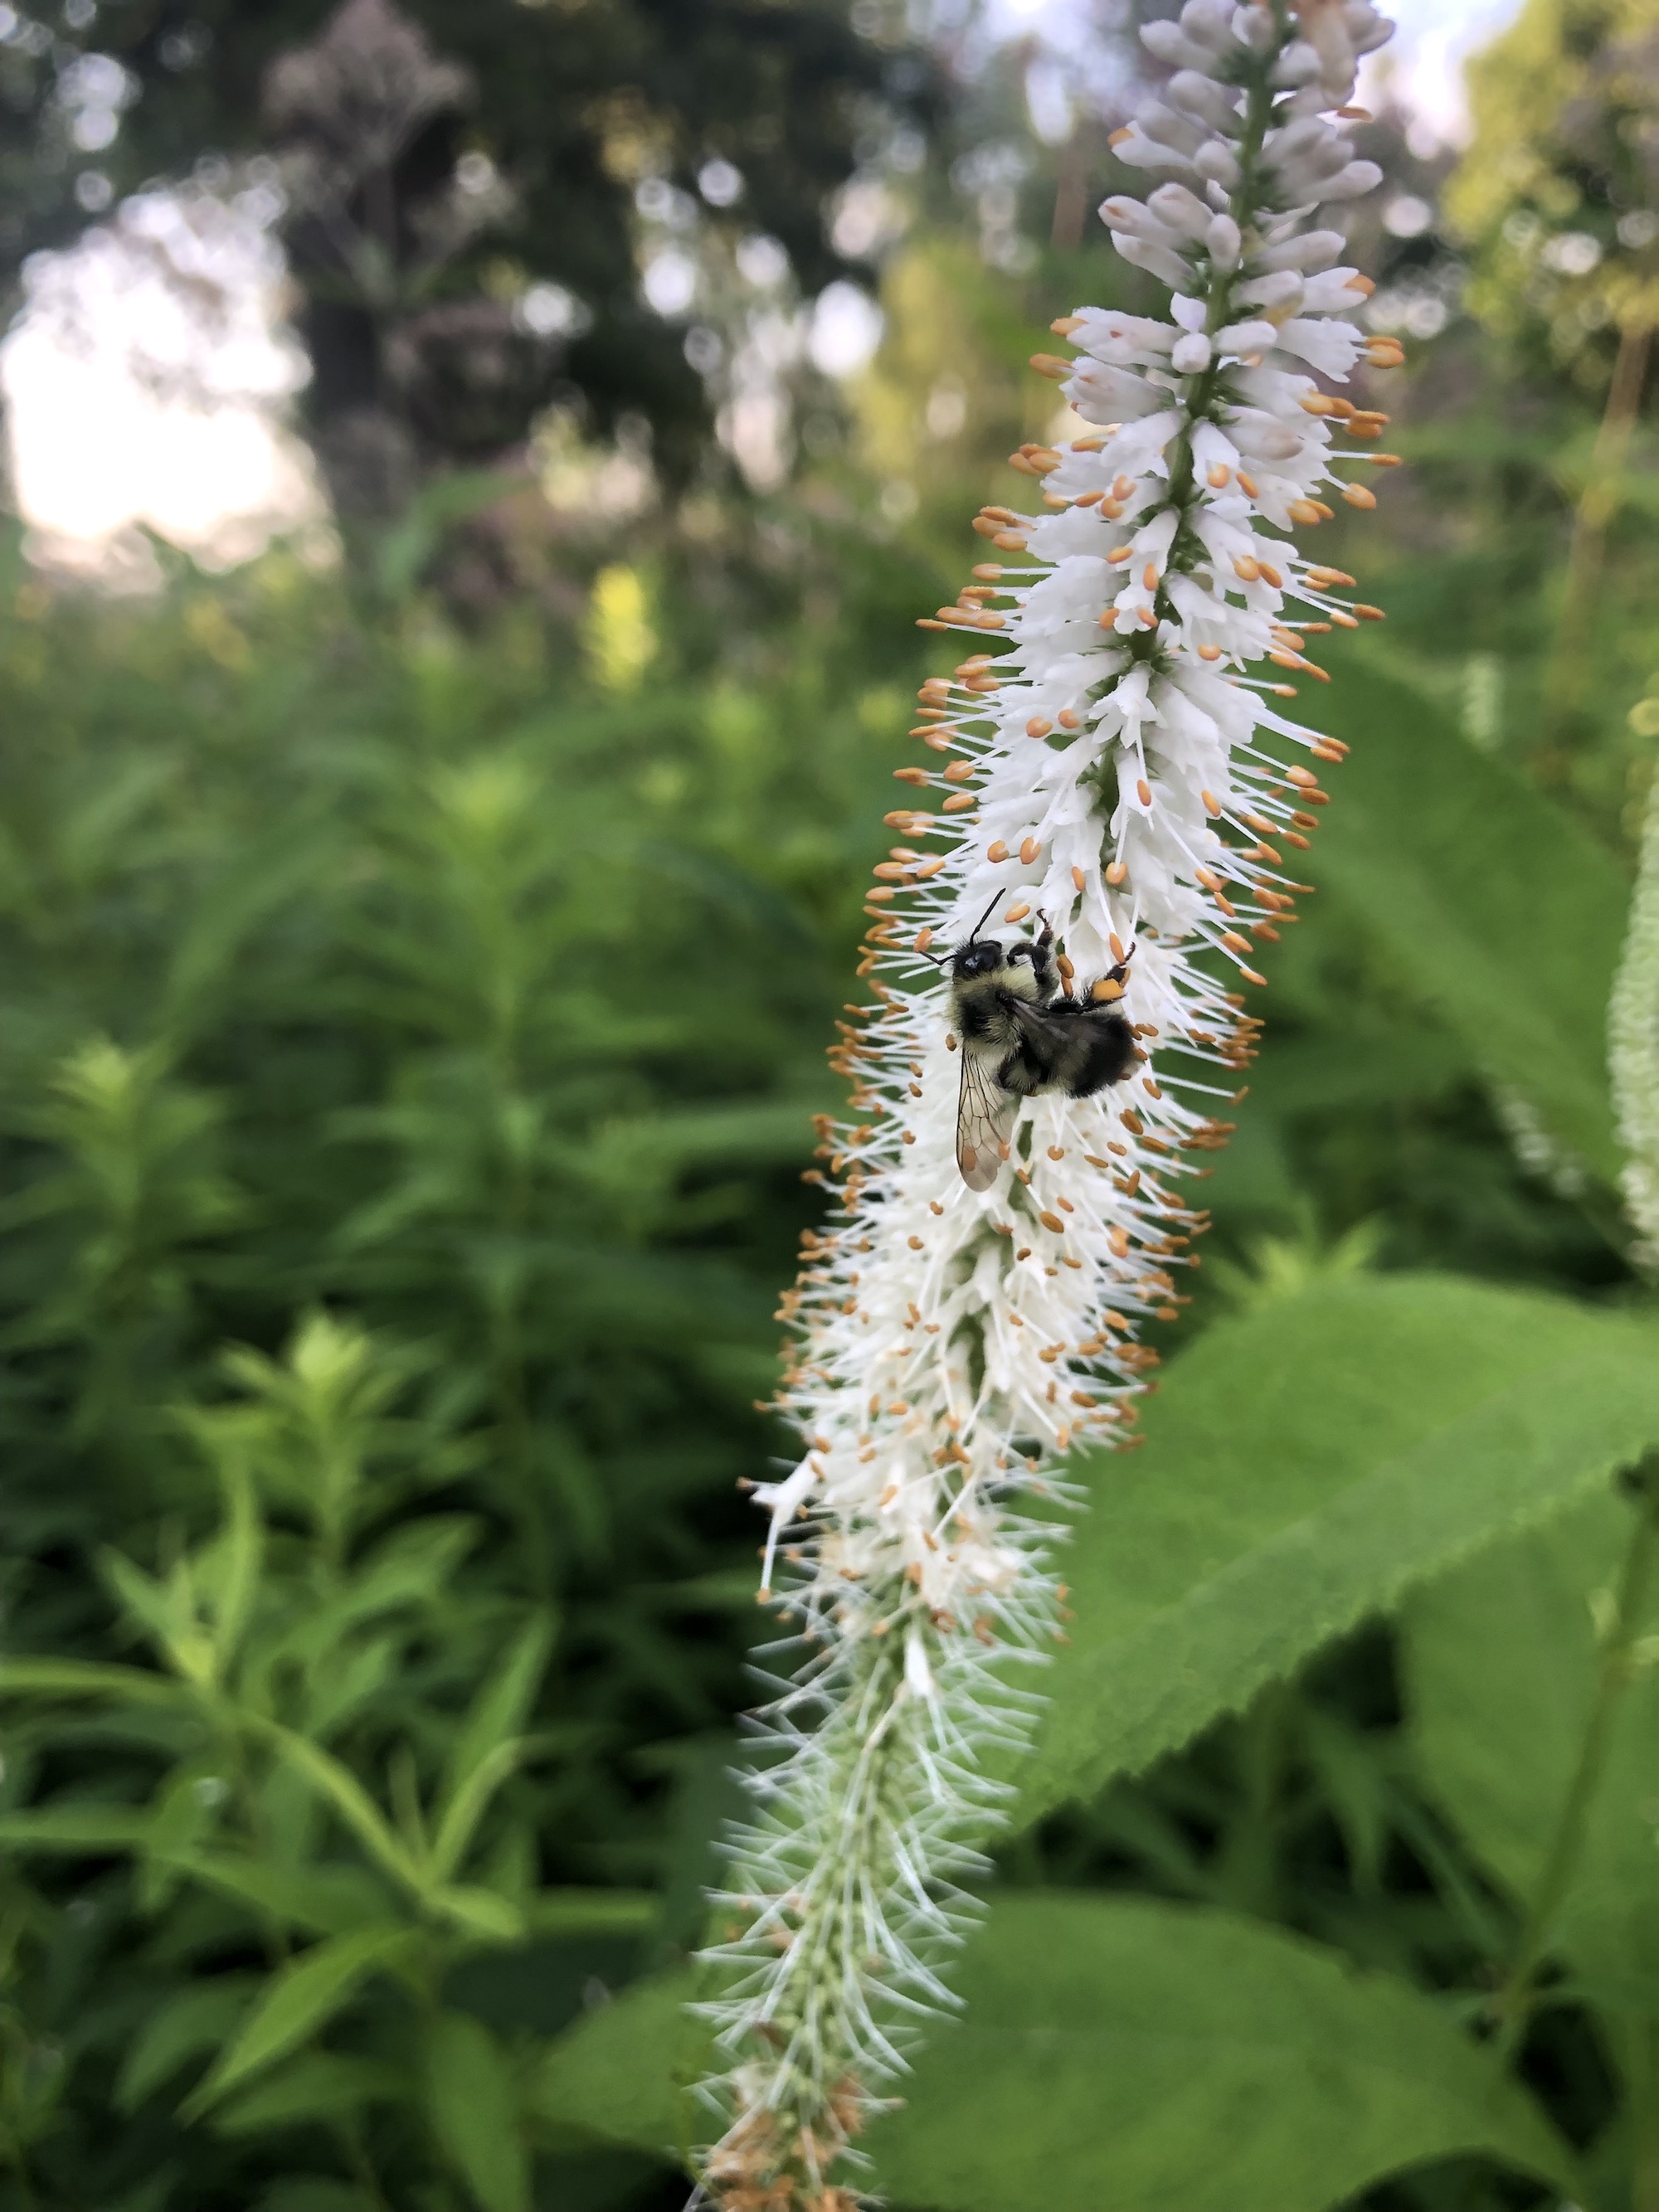 Culver's Root in Oak Savanna in Madison, Wisconsin on July 9, 2021.